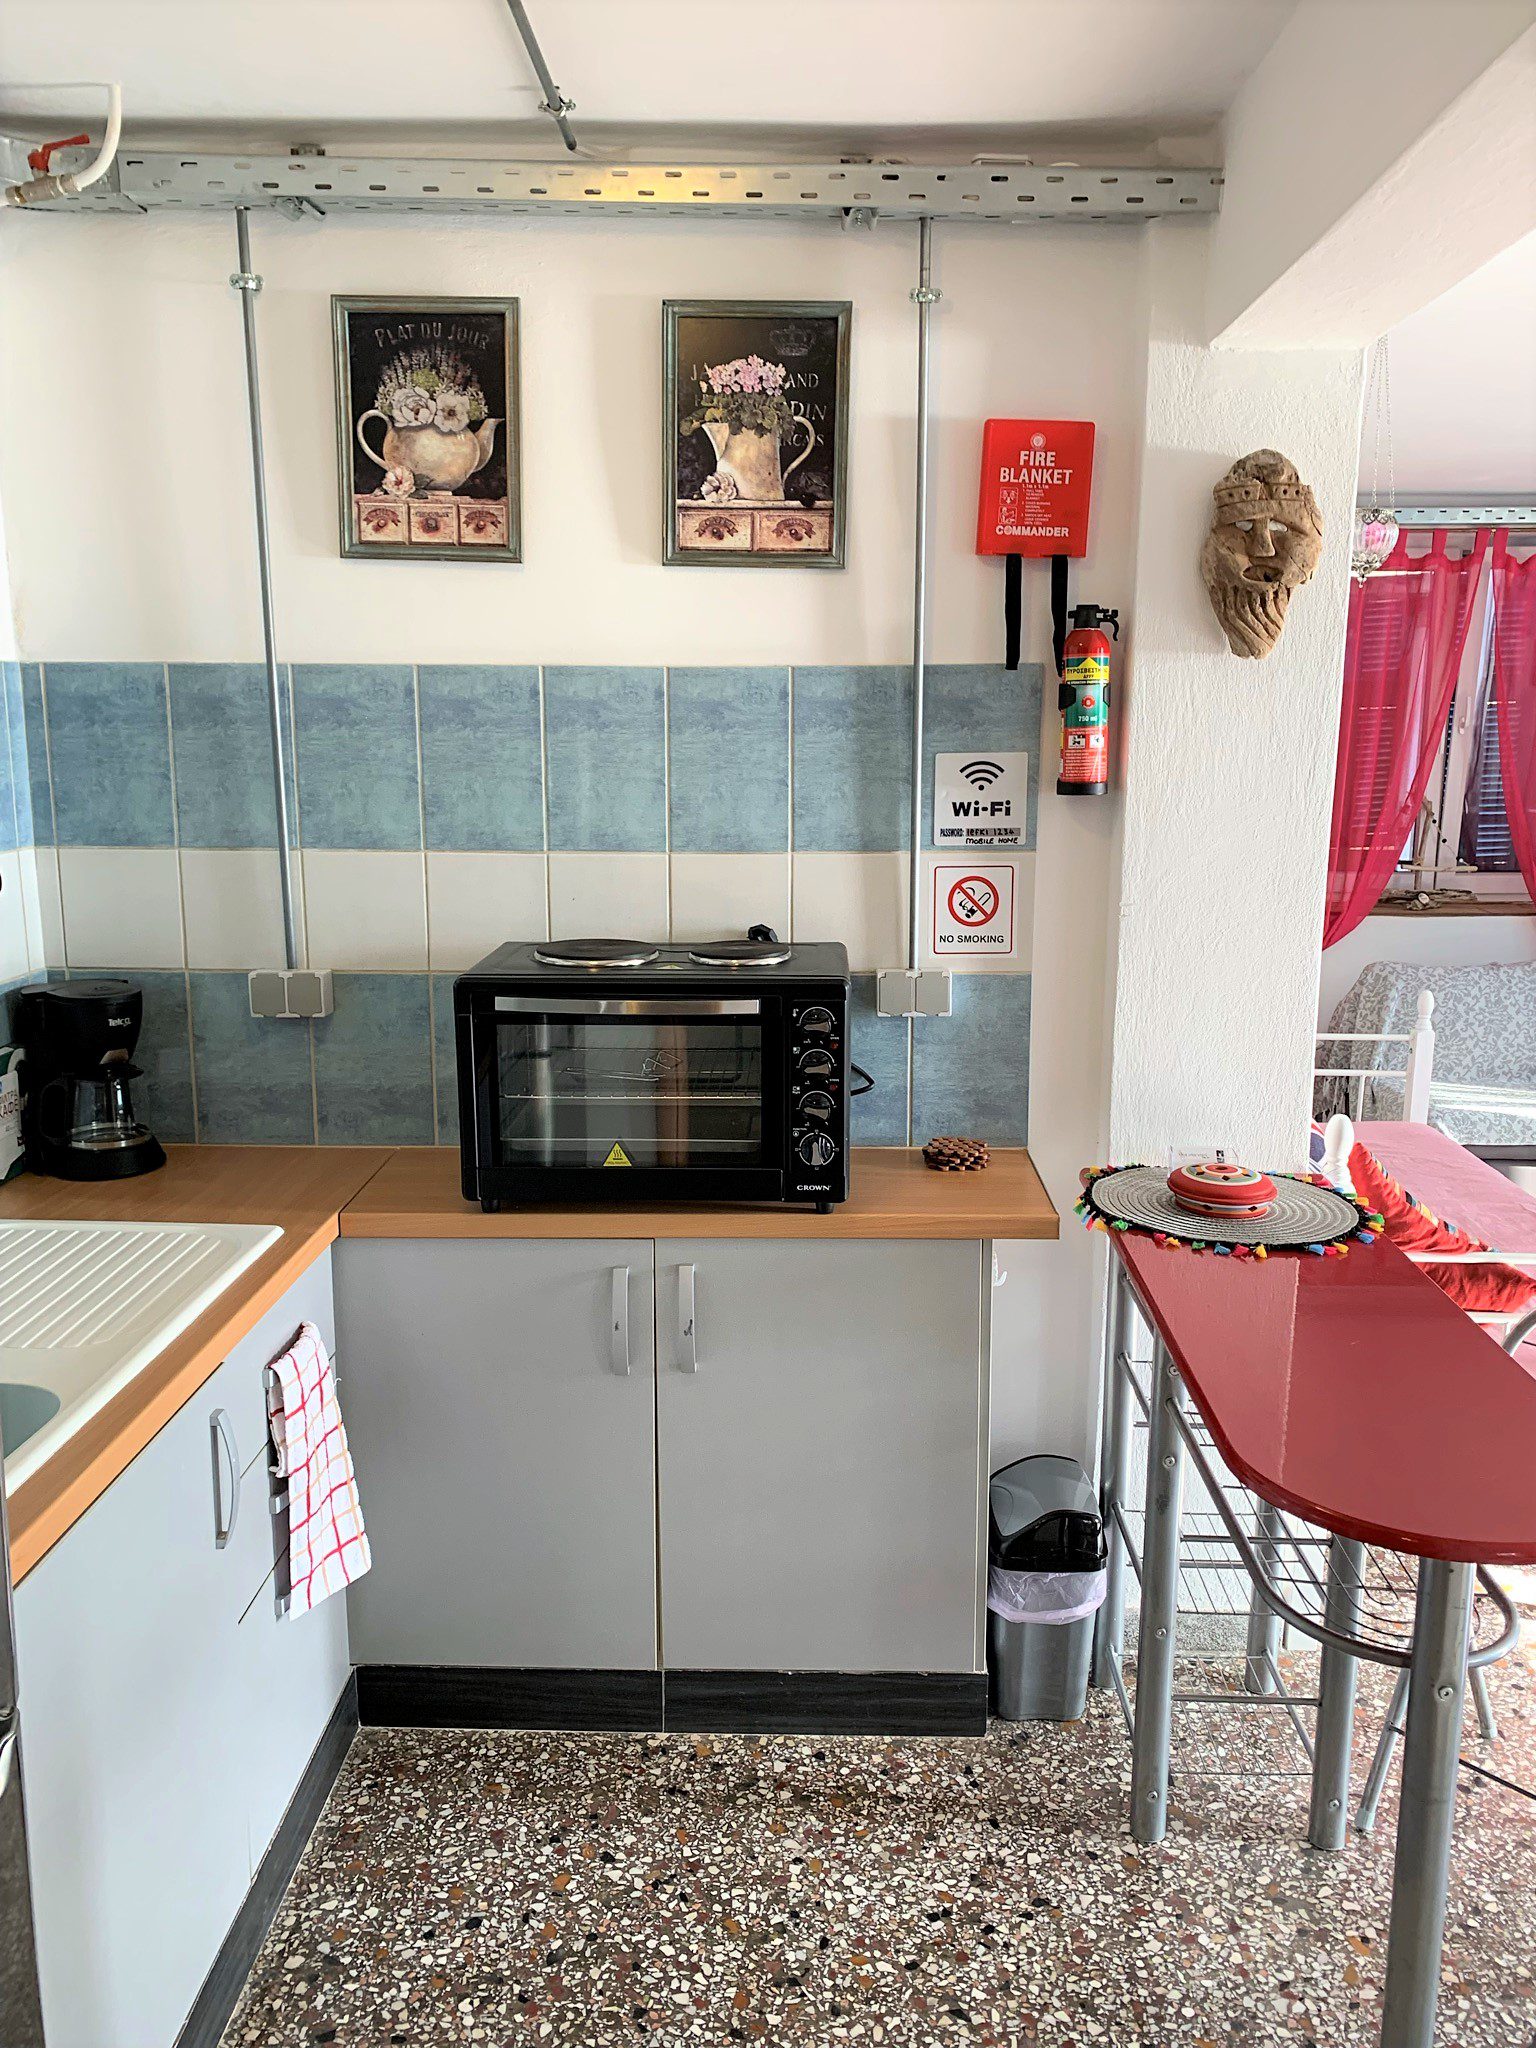 Kitchen of studio flat of house for sale in Ithaca Greece, Lefki